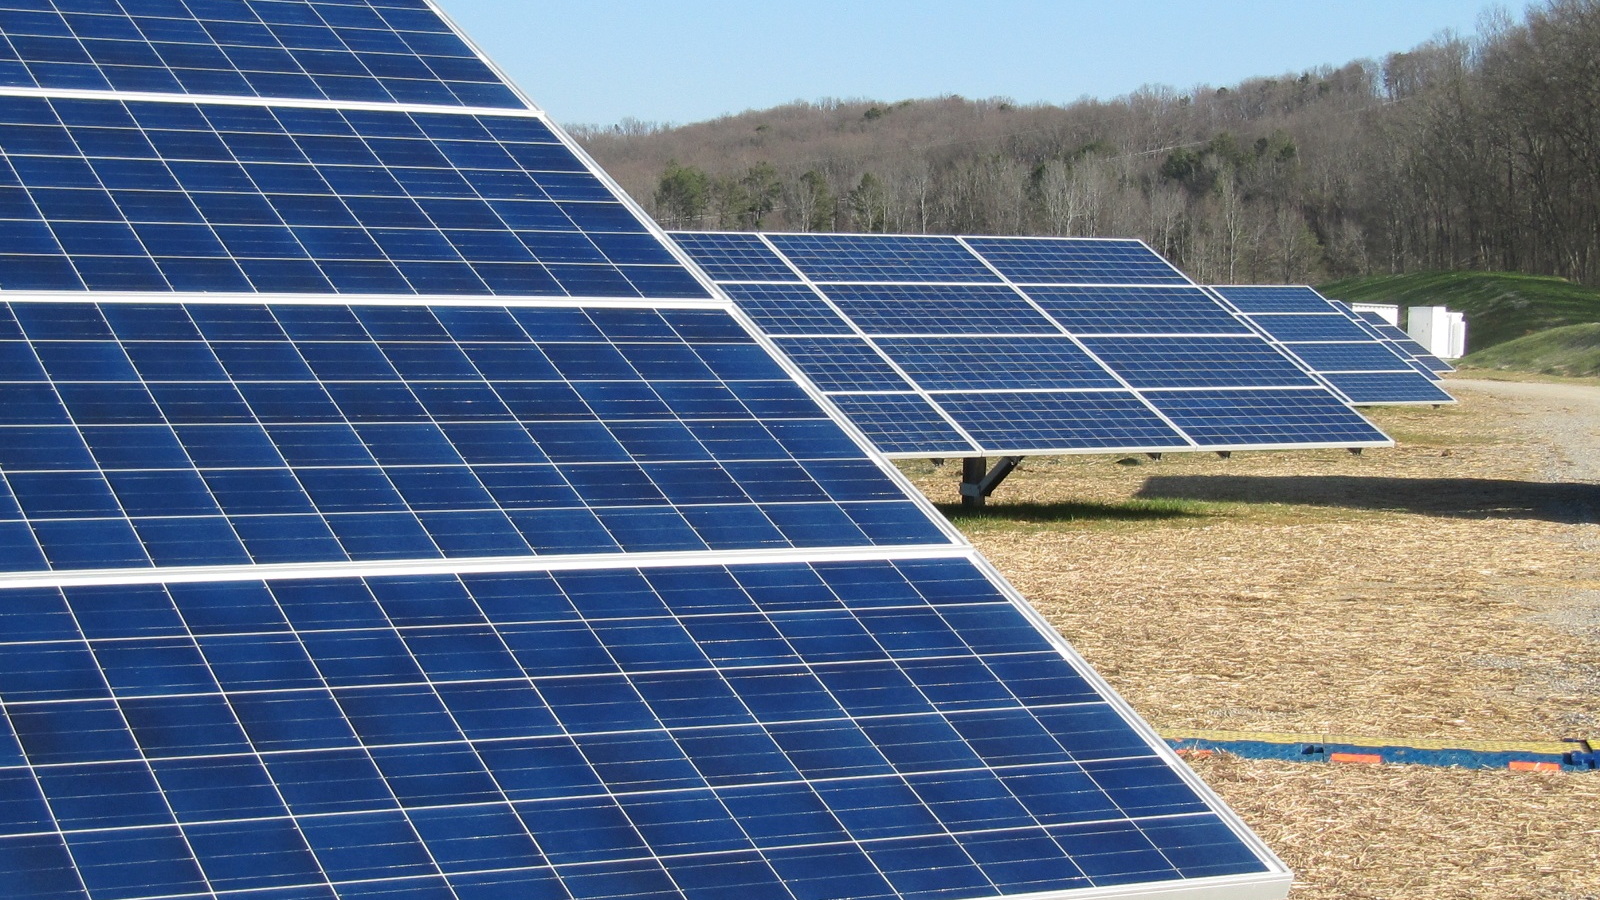 Photovoltaic solar power field at Volkswagen plant in Chattanooga, Tennessee